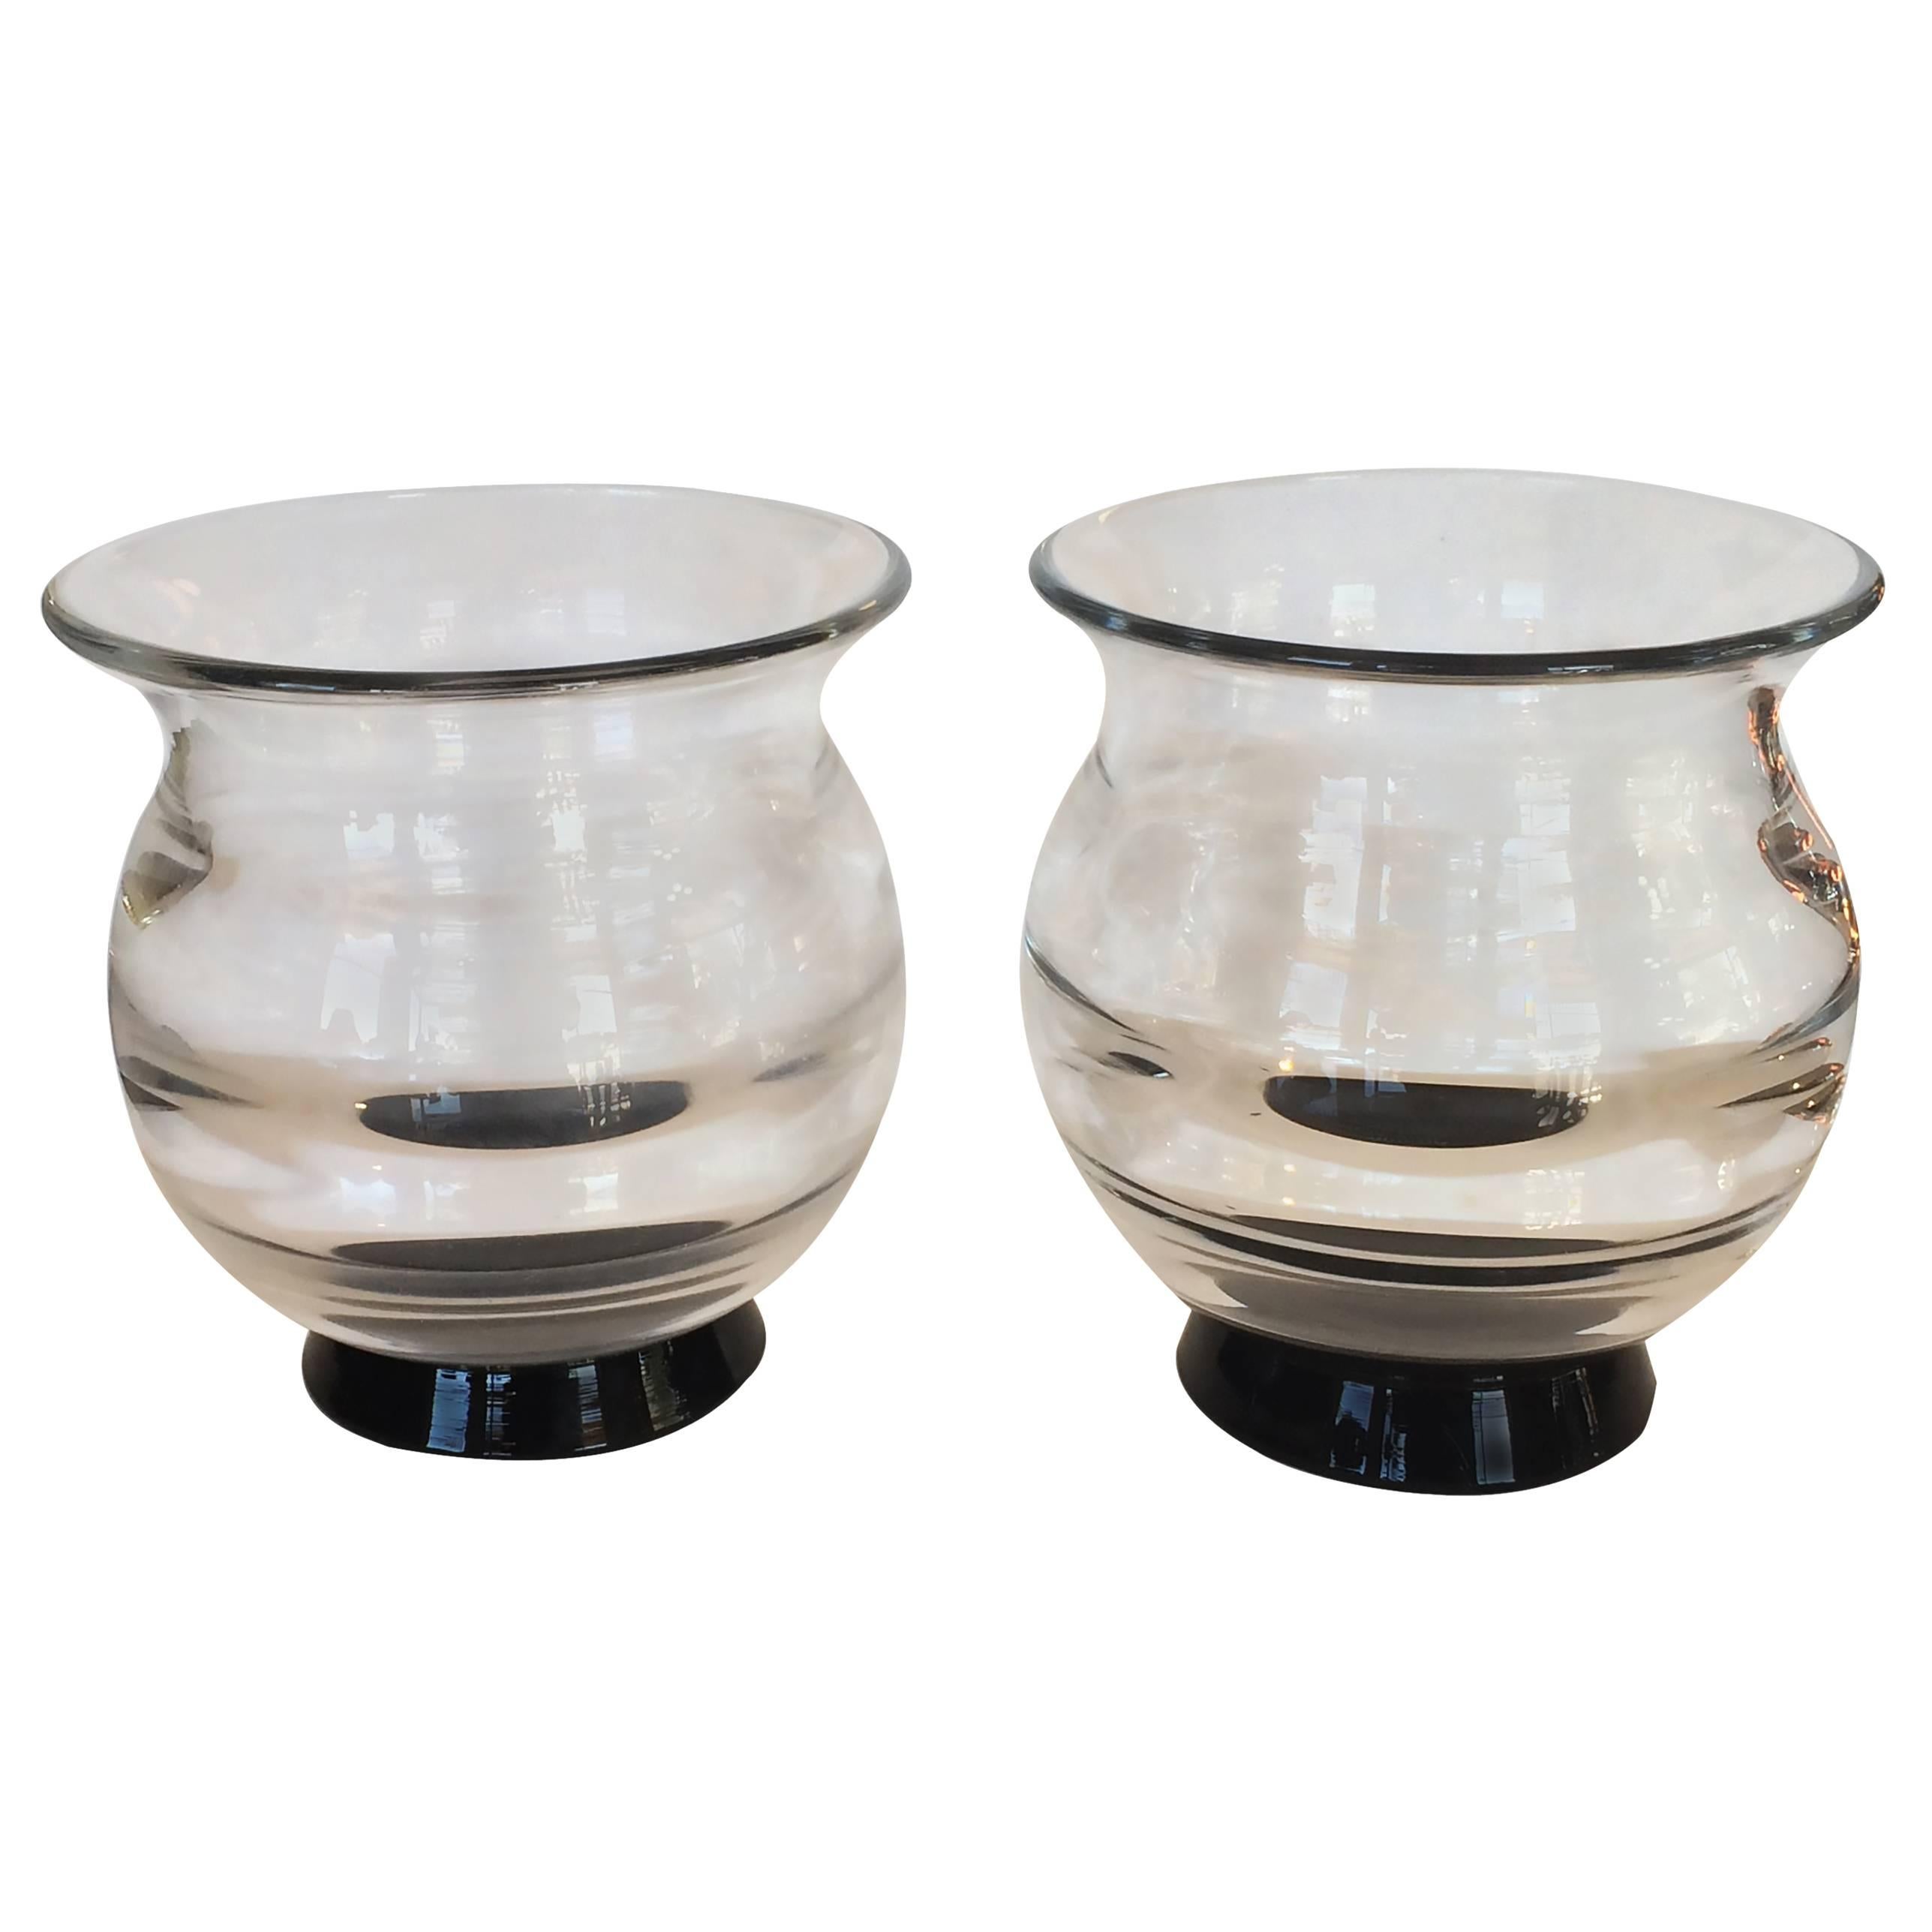 Pair of Early Orrefors Vases Designed by Edward Hald